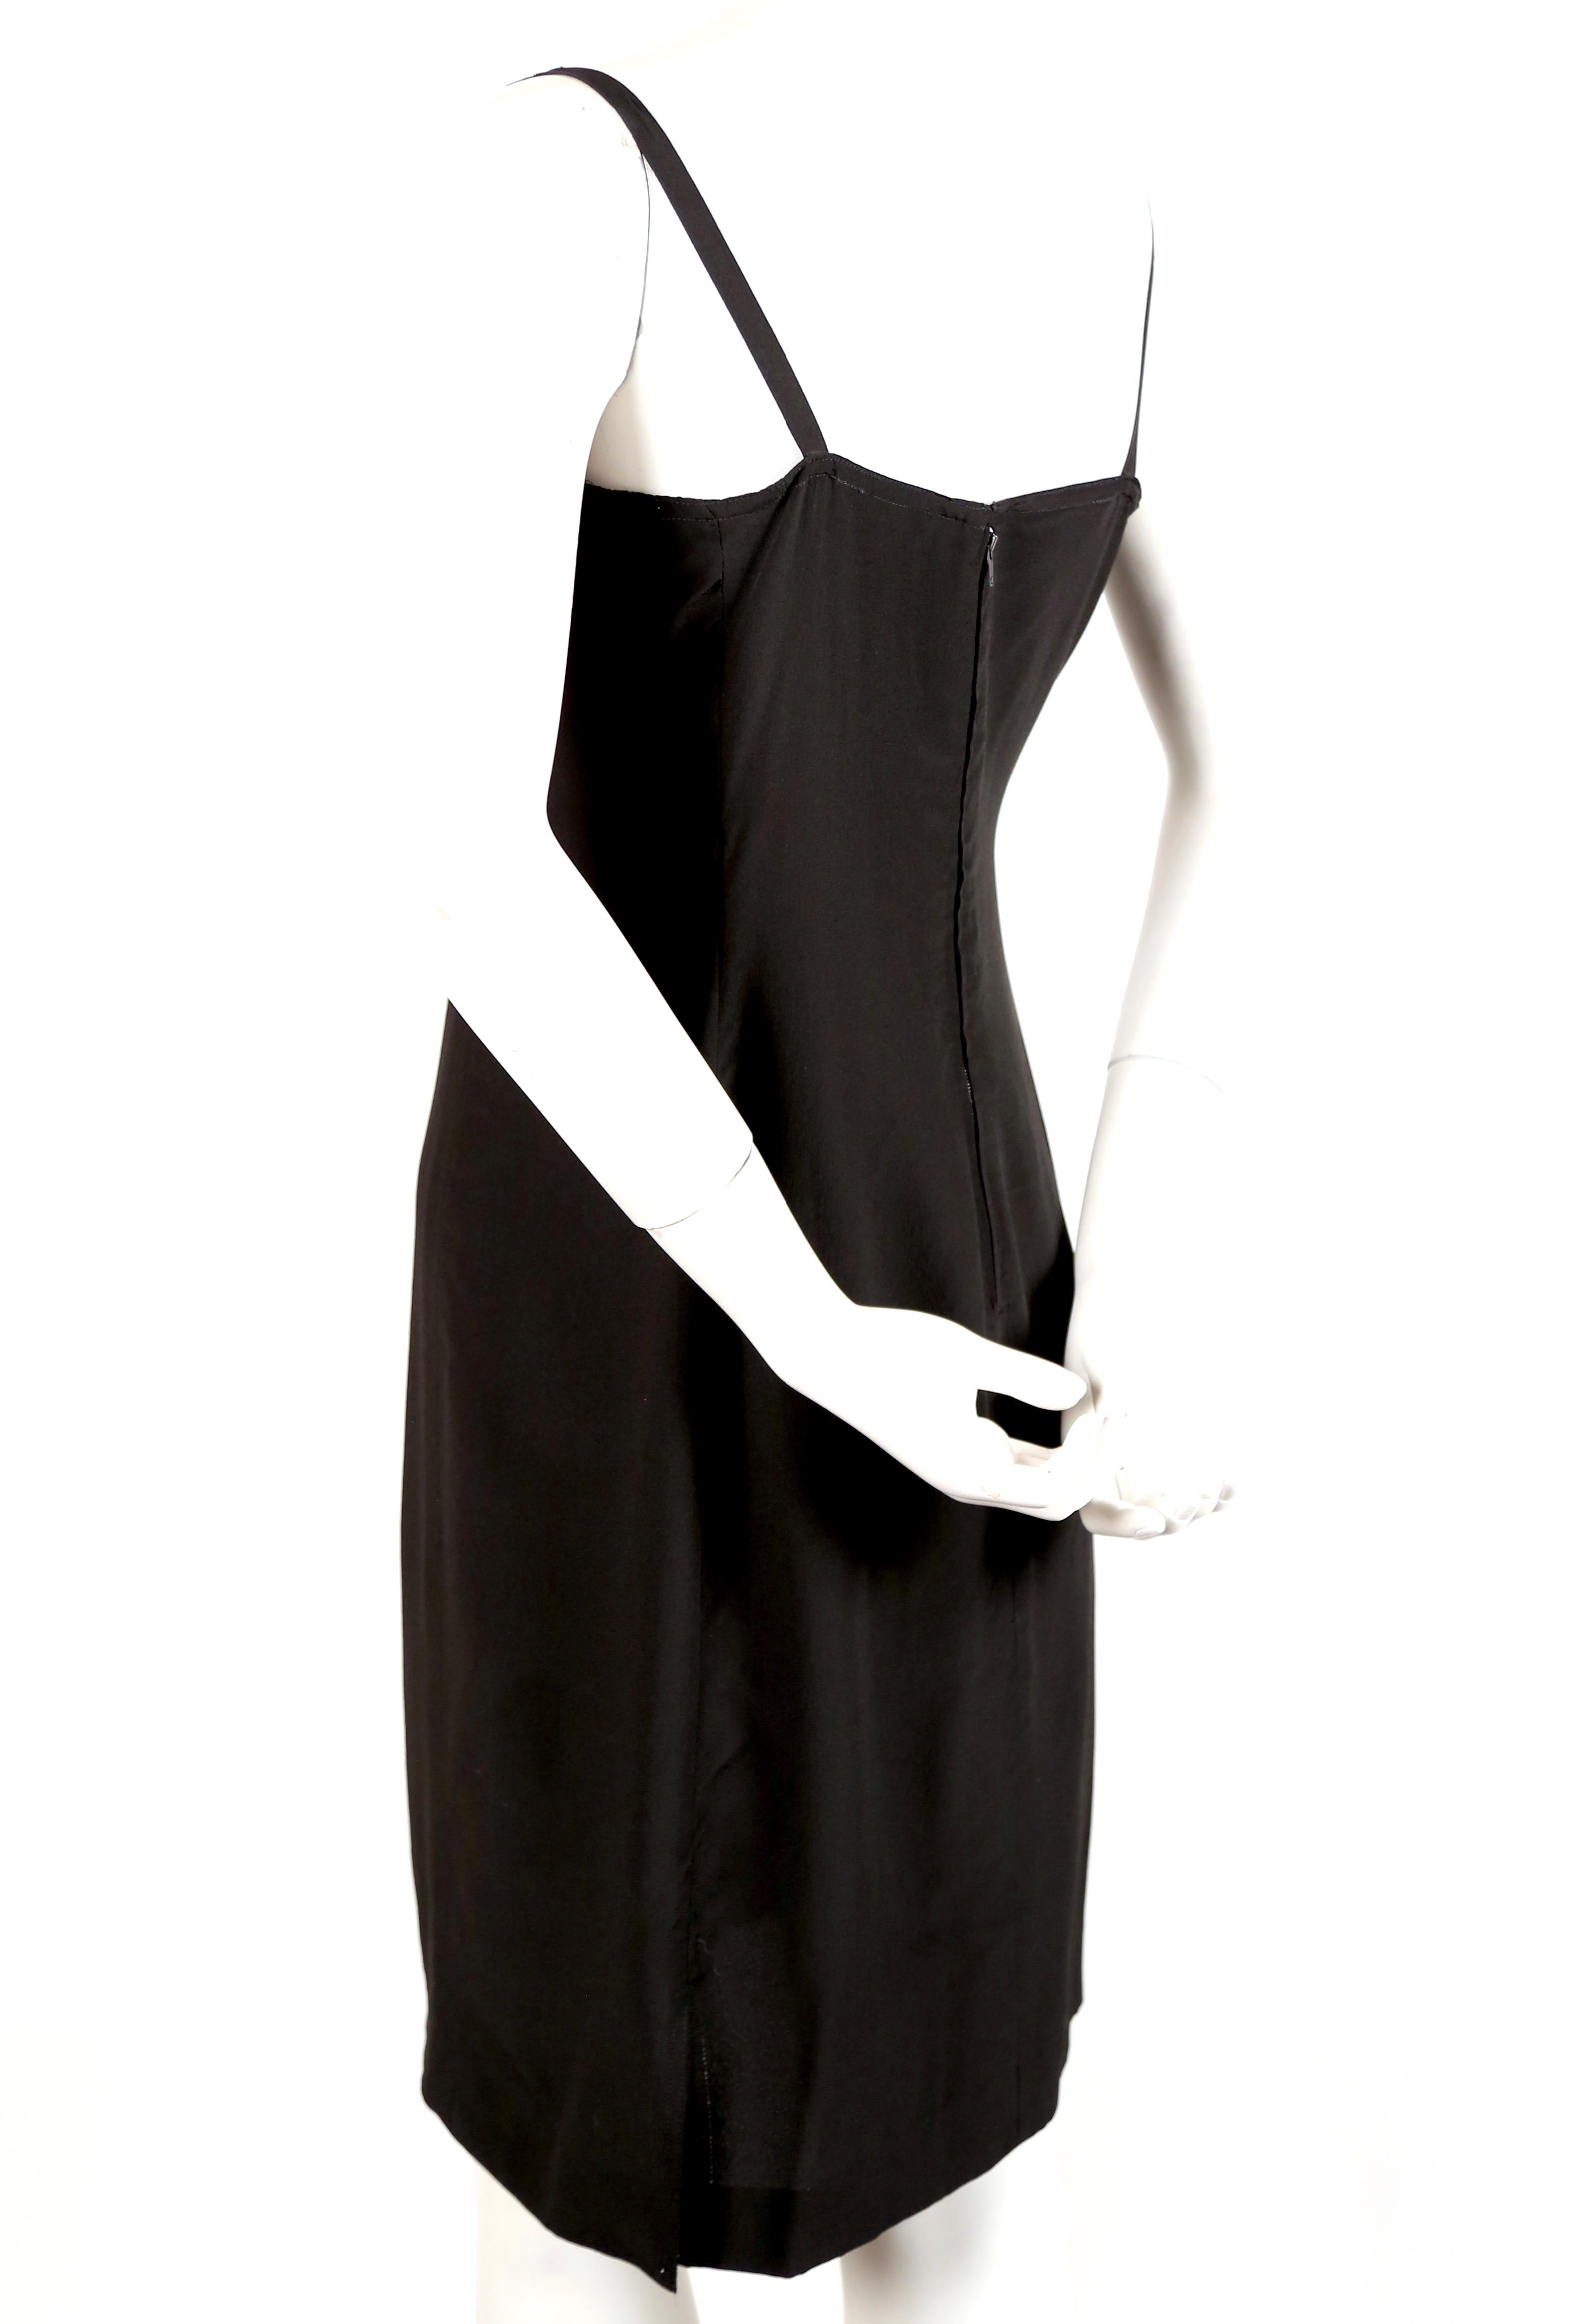 Women's 1970's KARL LAGERFELD for CHLOE black silk dress with beads For Sale